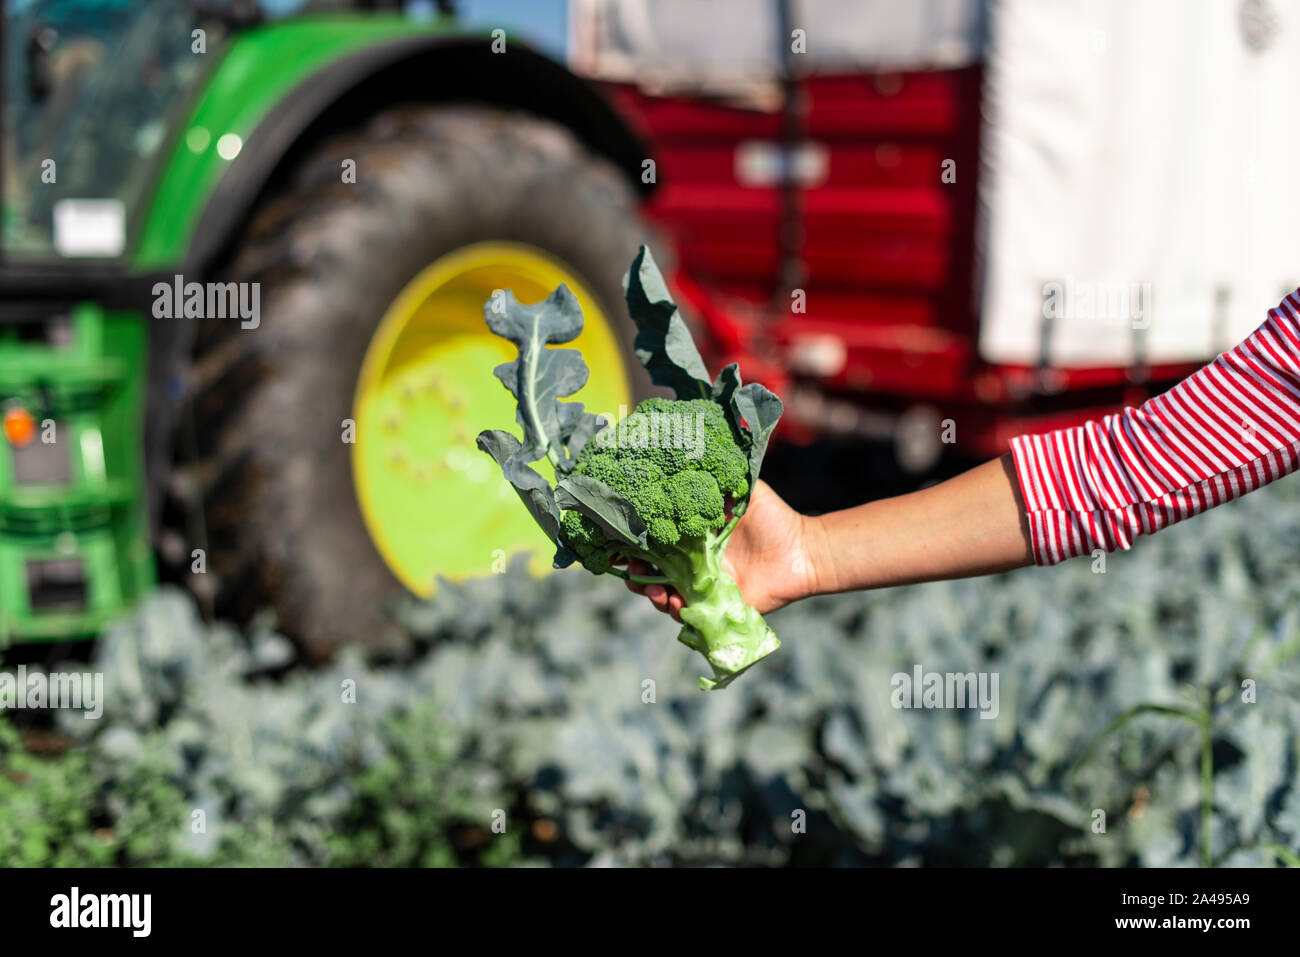 Worker shows broccoli on plantation. Picking broccoli. Tractor and automated platform in broccoli big garden. Sunny day. Woman hold broccoli head. Stock Photo